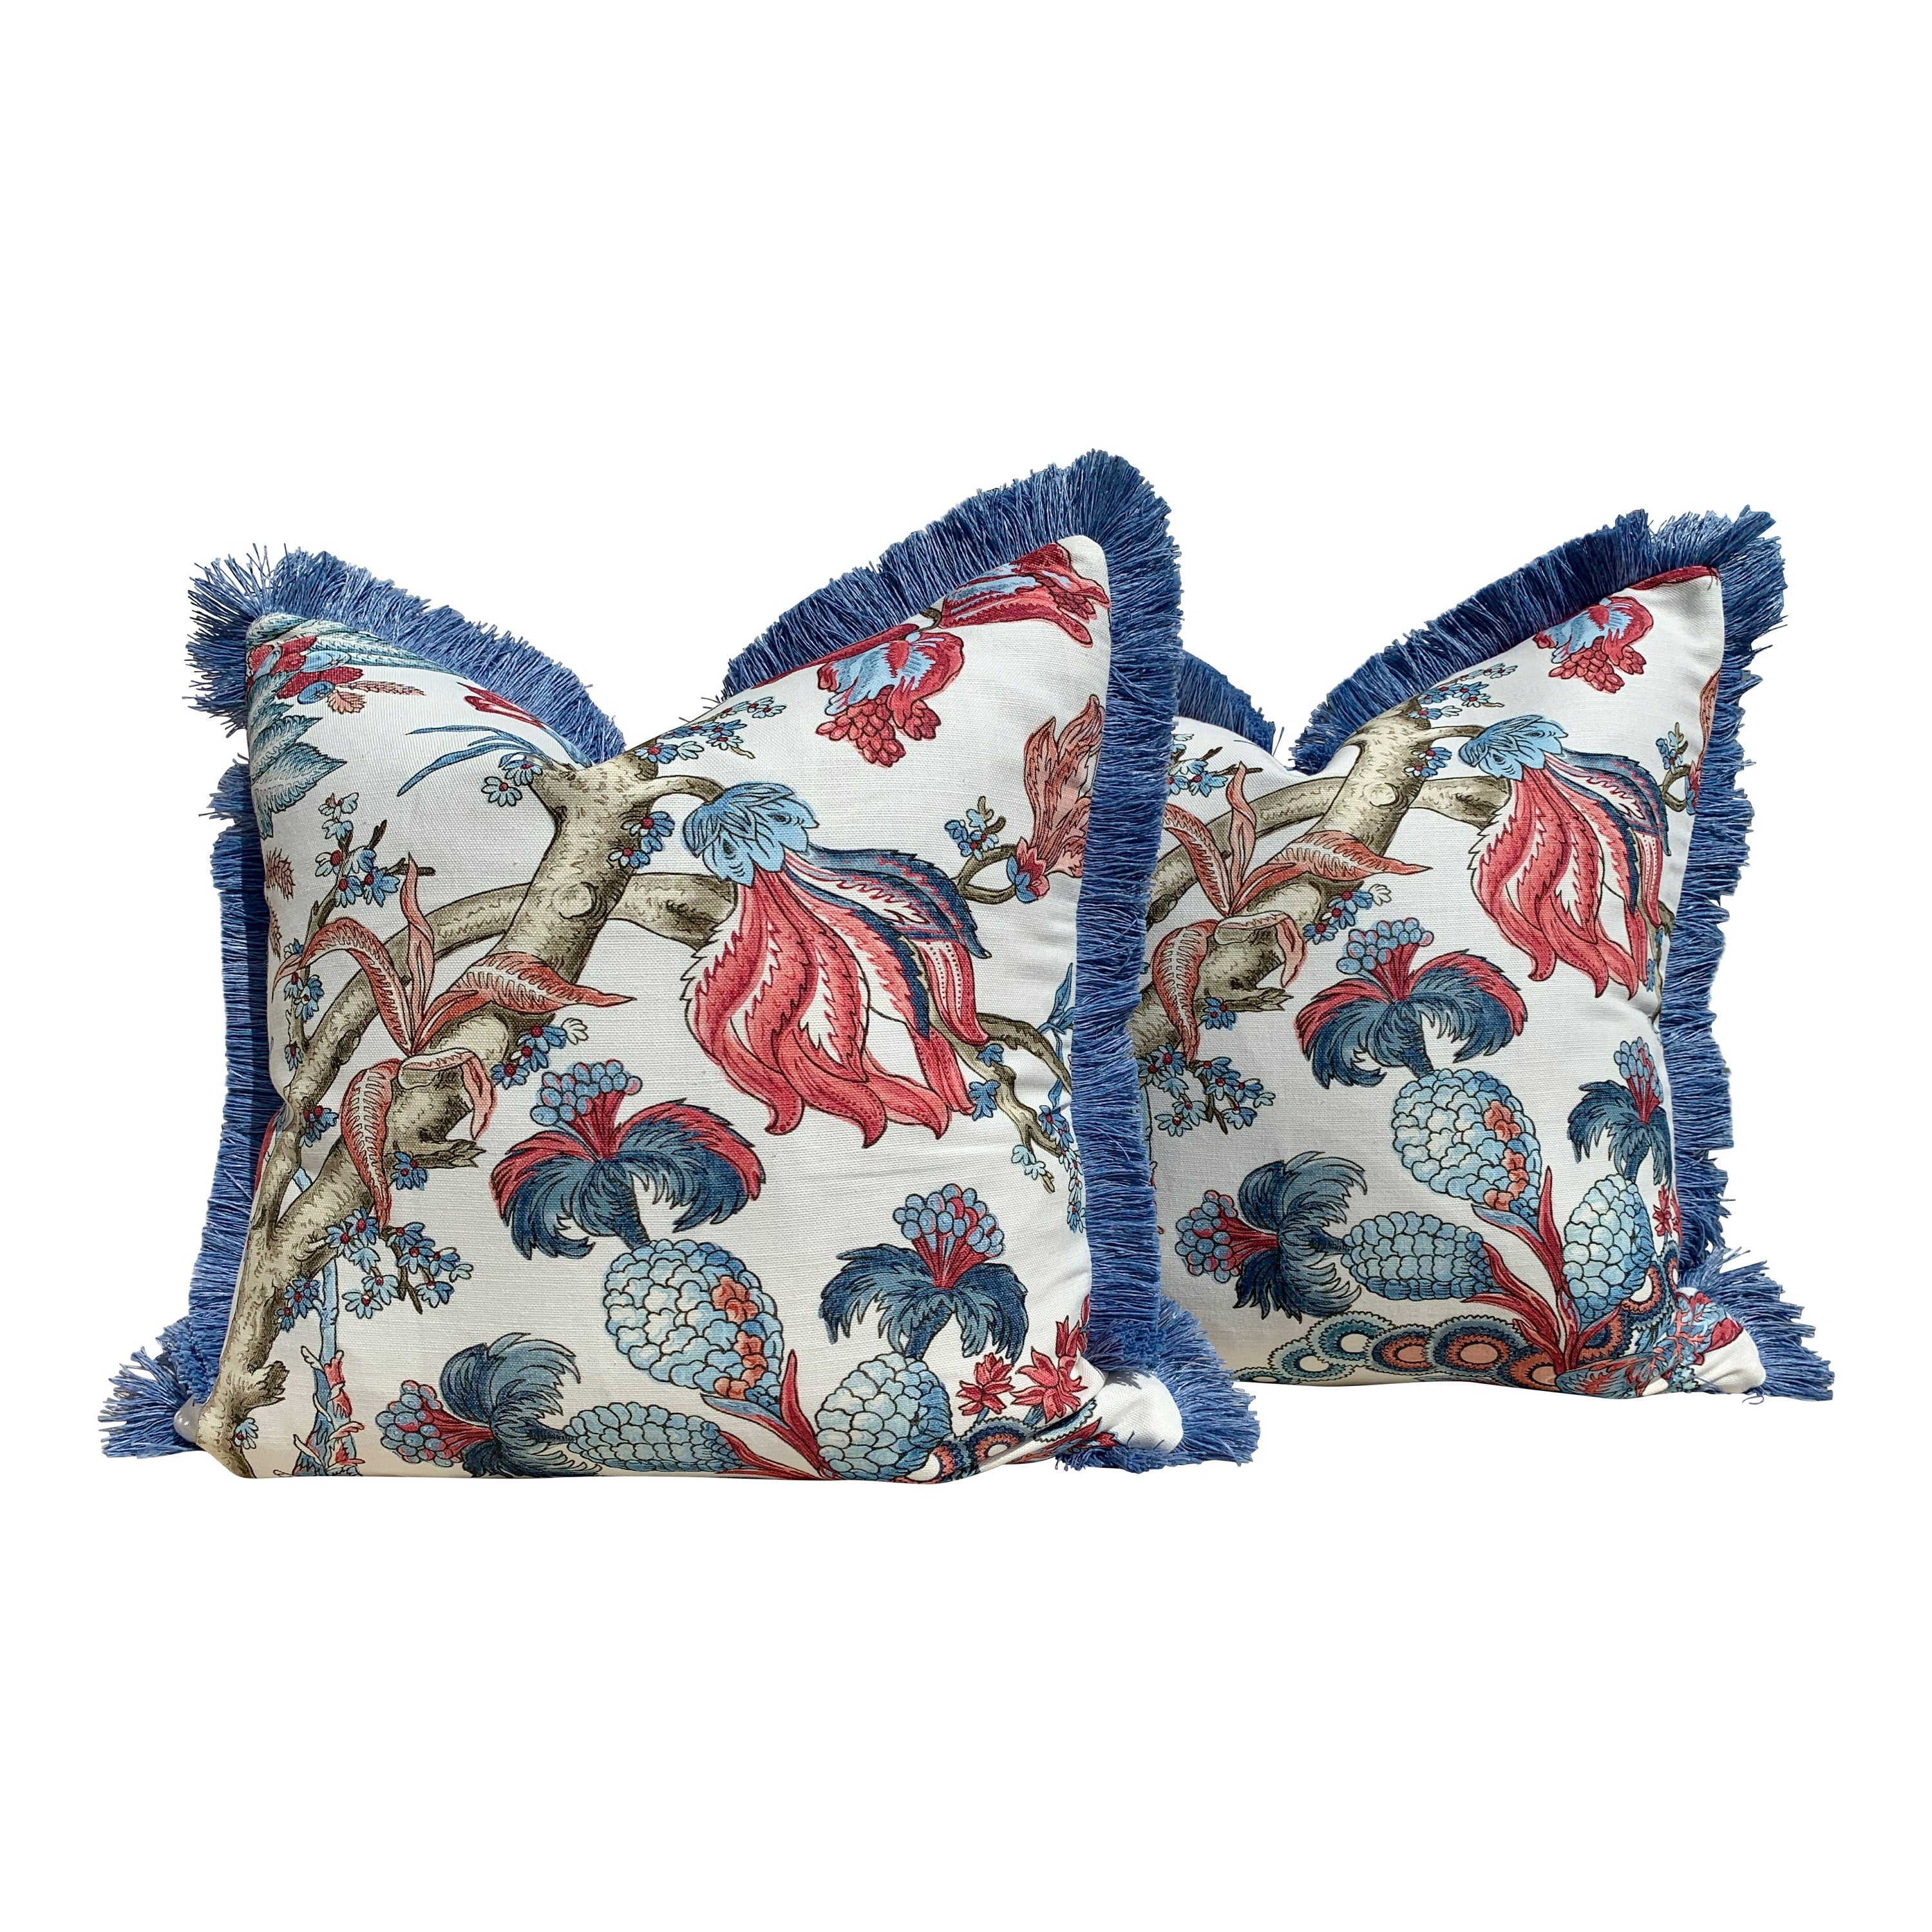 Thibaut Chatelain Pillow Cover in Blue and Red, Blue Brush Fringe. Designer Pillow Cover, Accent lumbar pillow